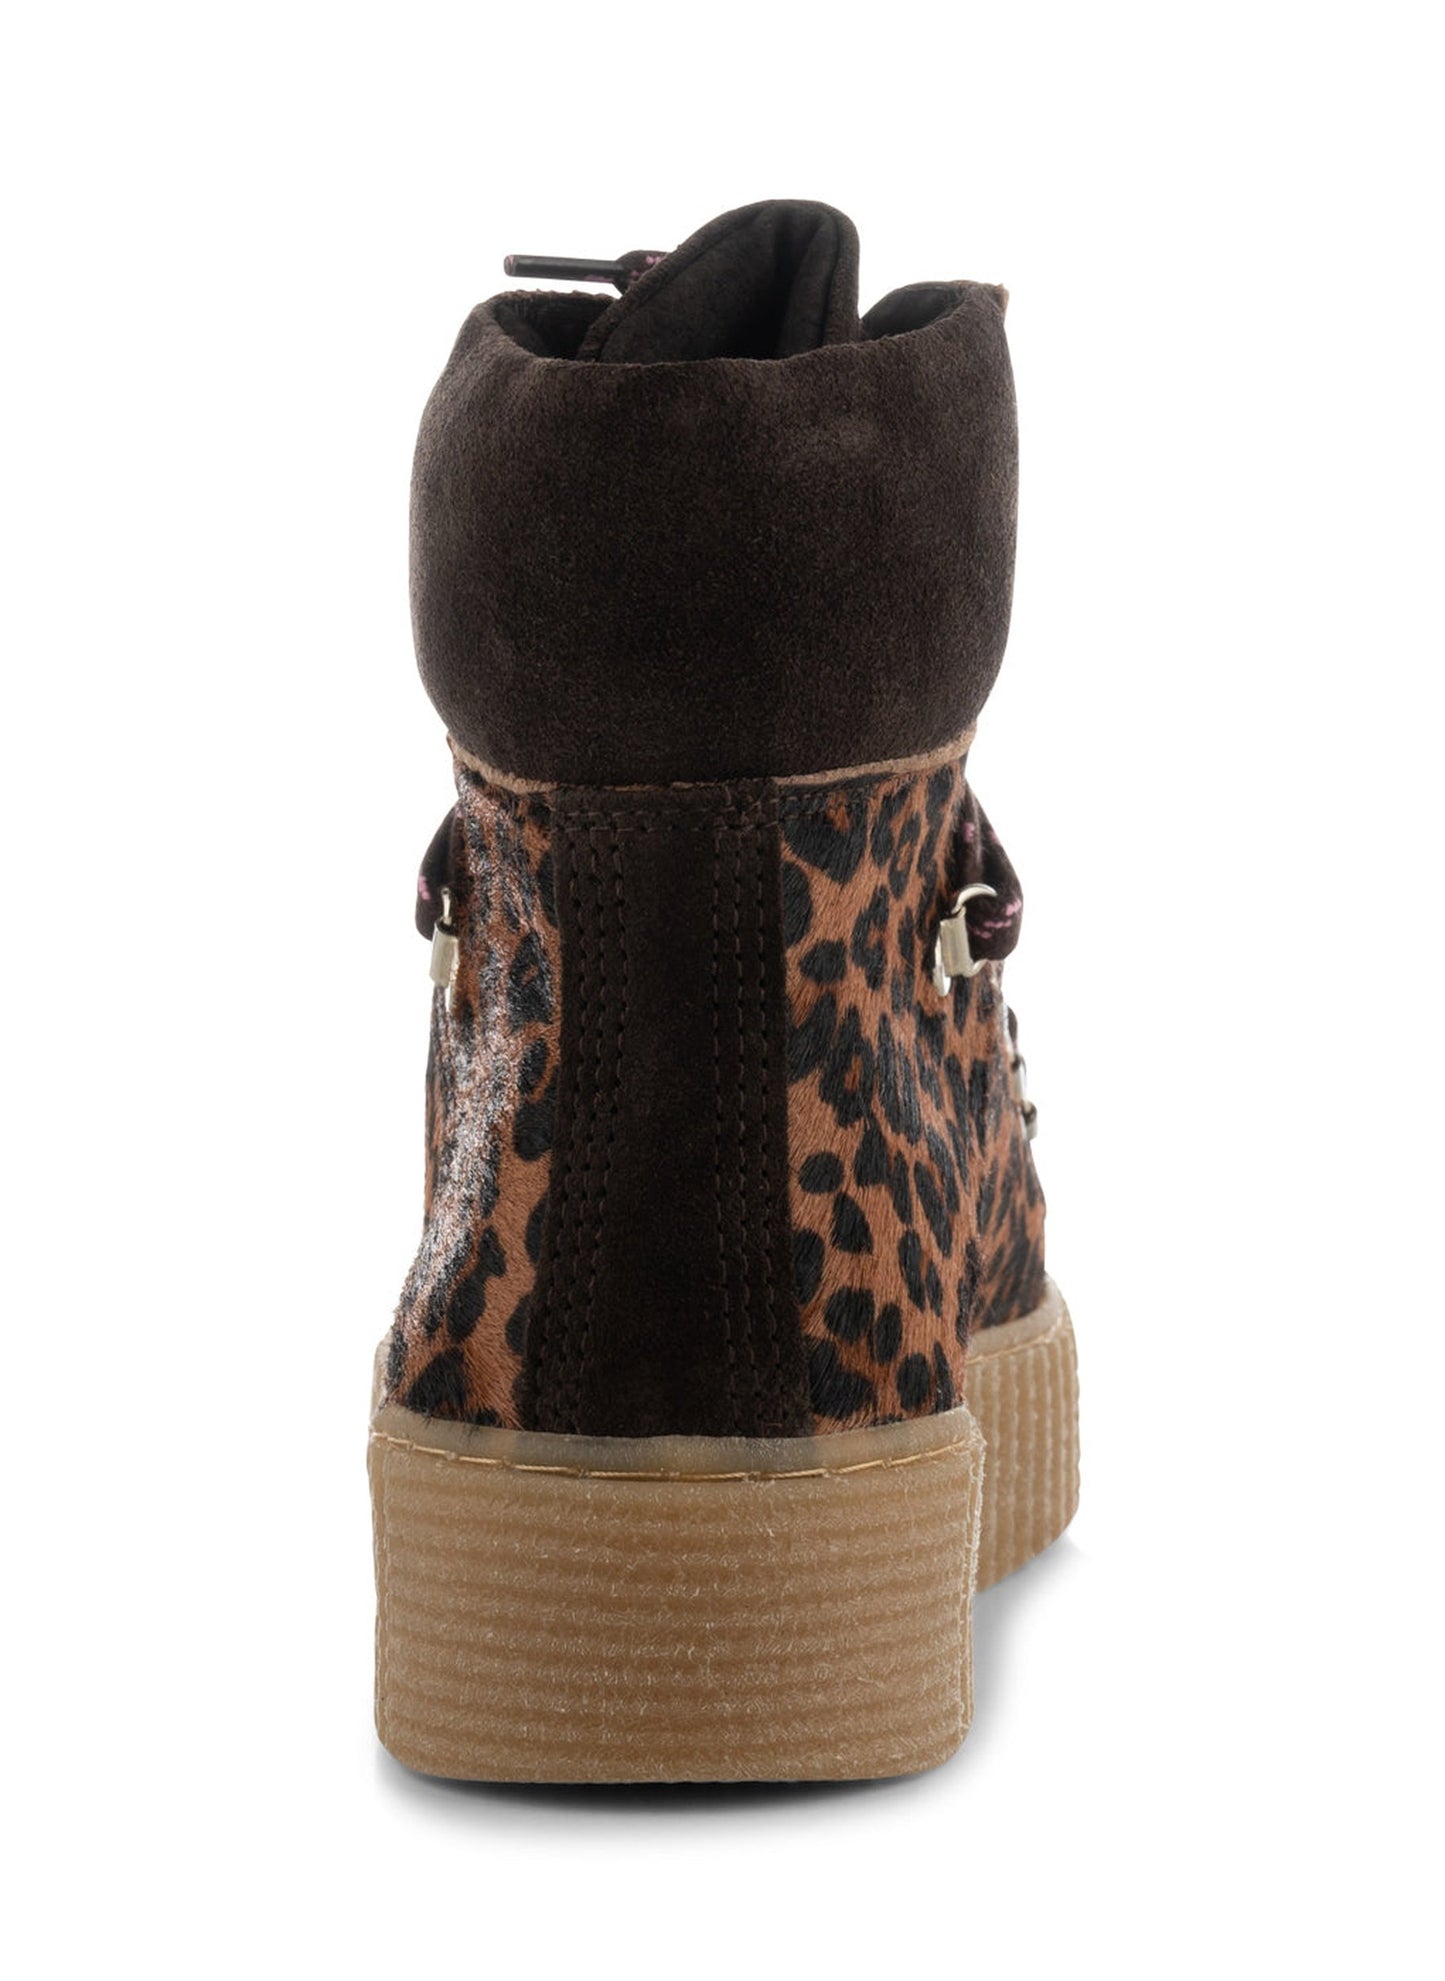 Shoe the Bear - Agda Boots - Leopard